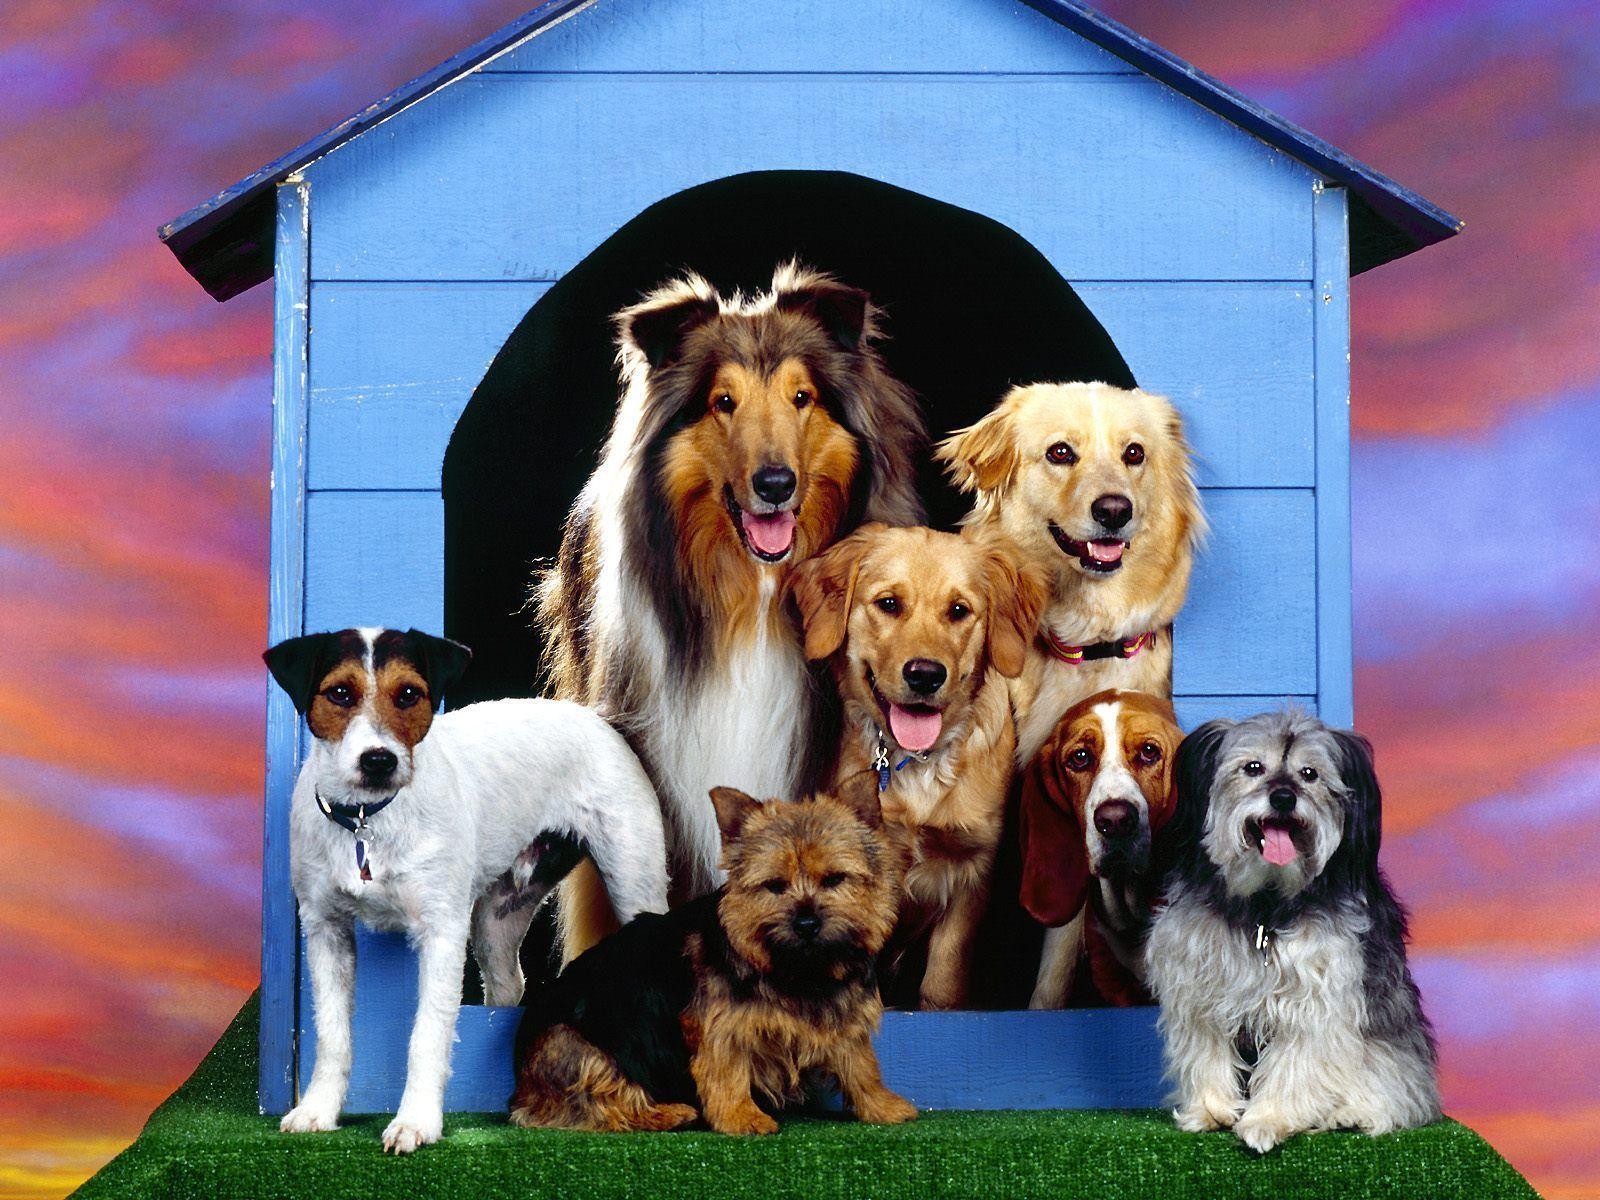 Dogs Family at Home Wallpaper Background. Dogs Wallpaper